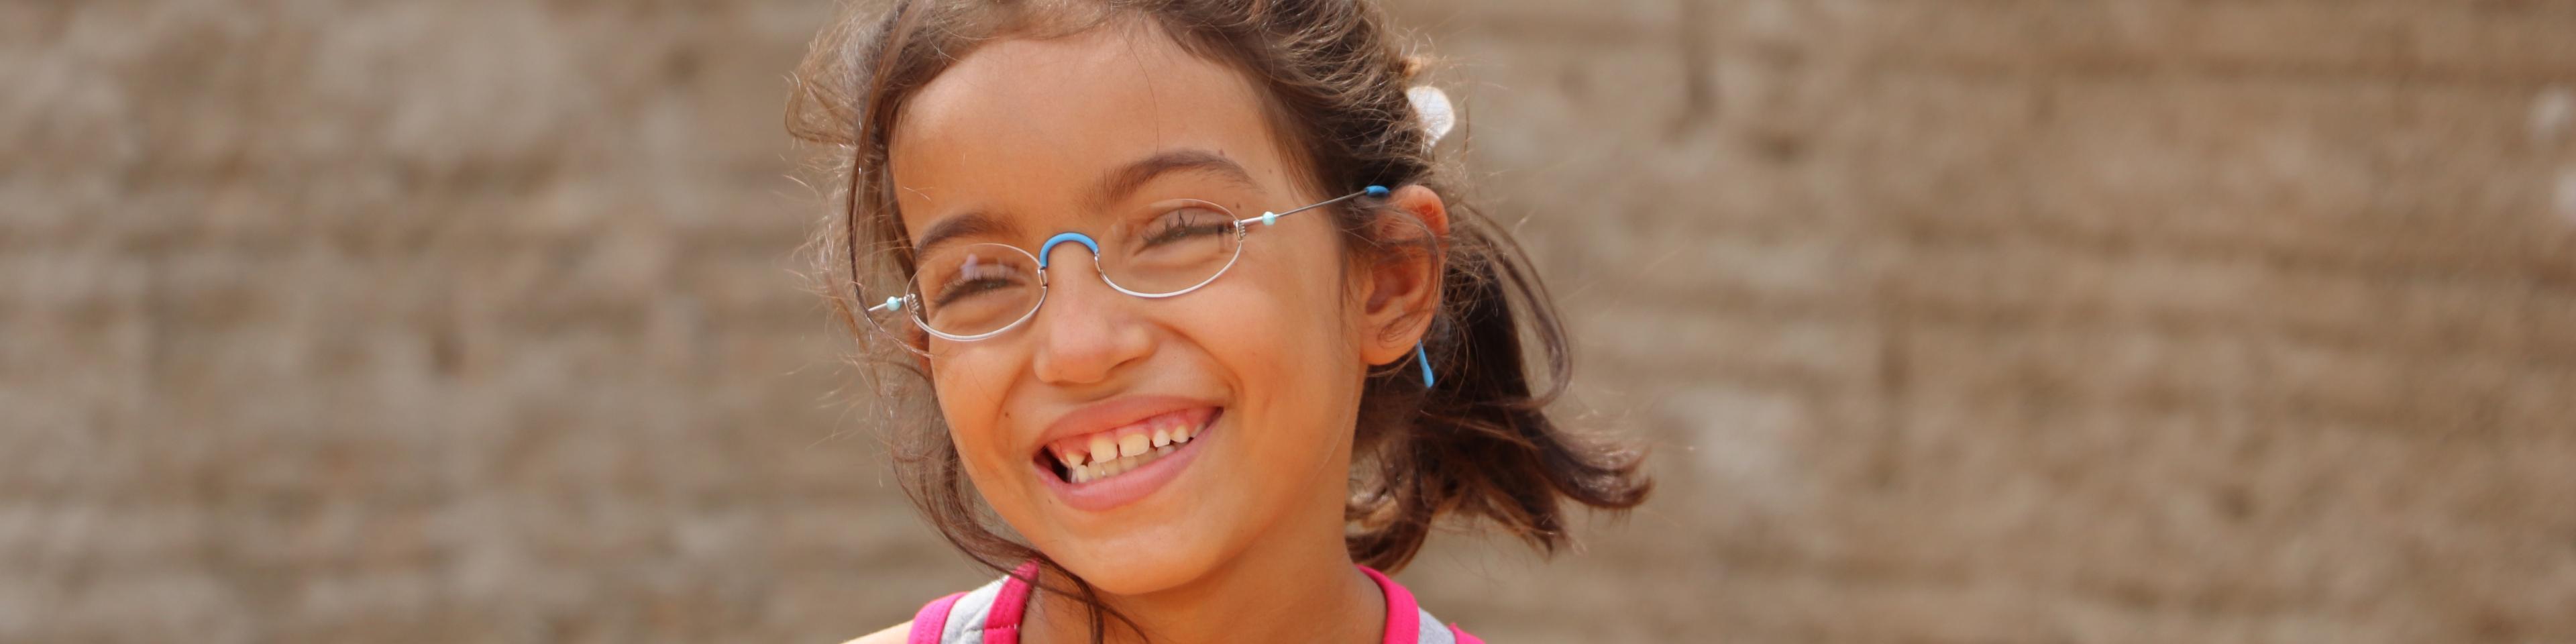 Smiling girl from Brazil with OneDollarGlasses